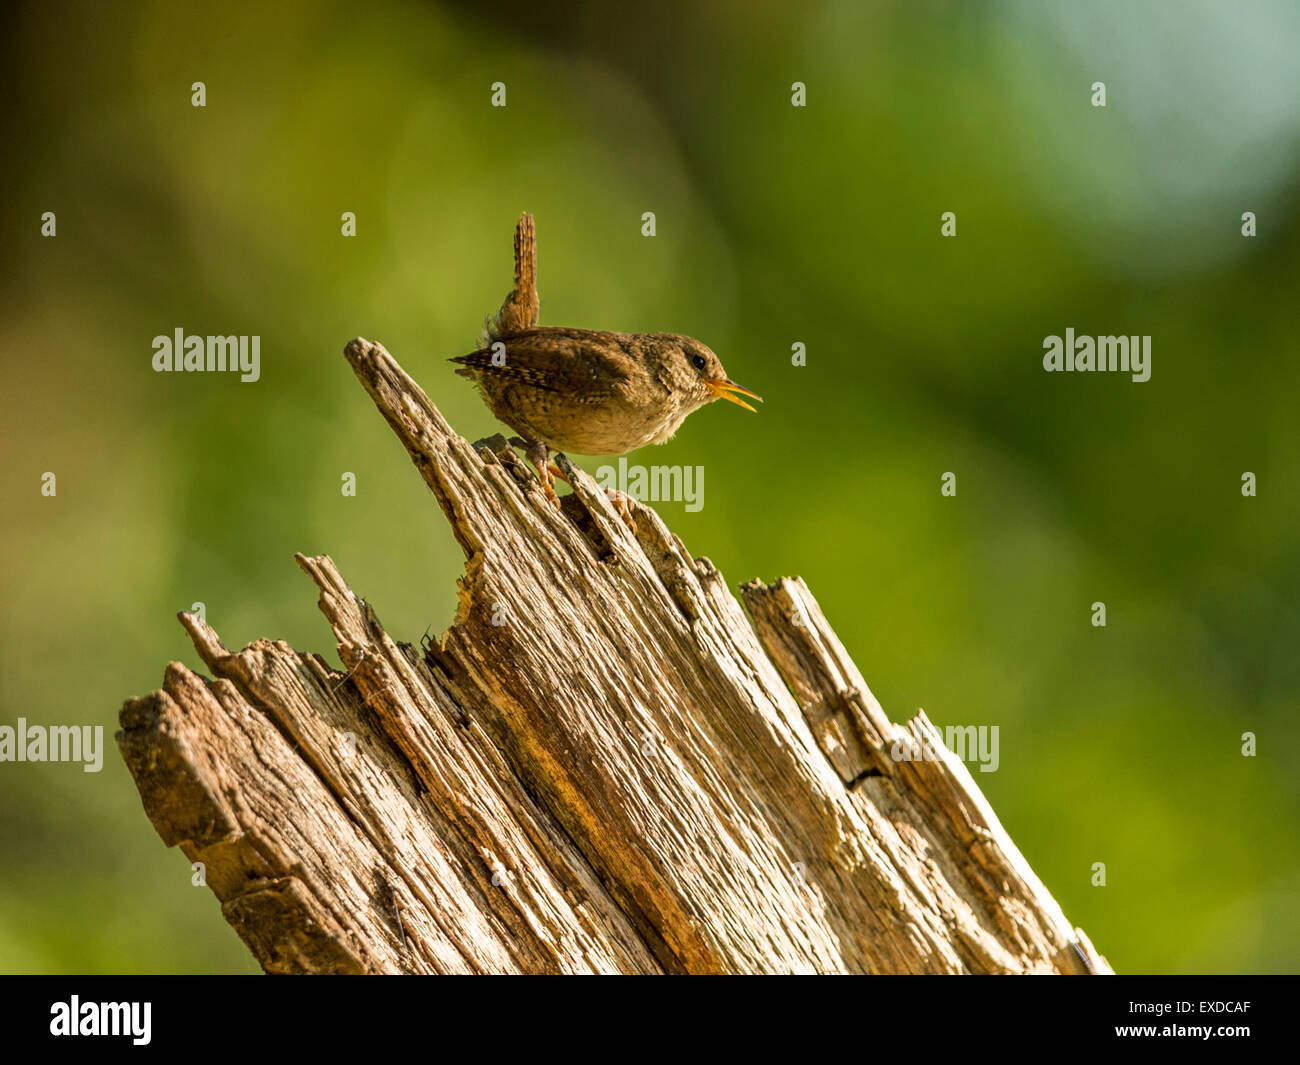 British Wren depicted singing on an old dilapidated wooden tree stump, bathed in early evening sunlight. Stock Photo